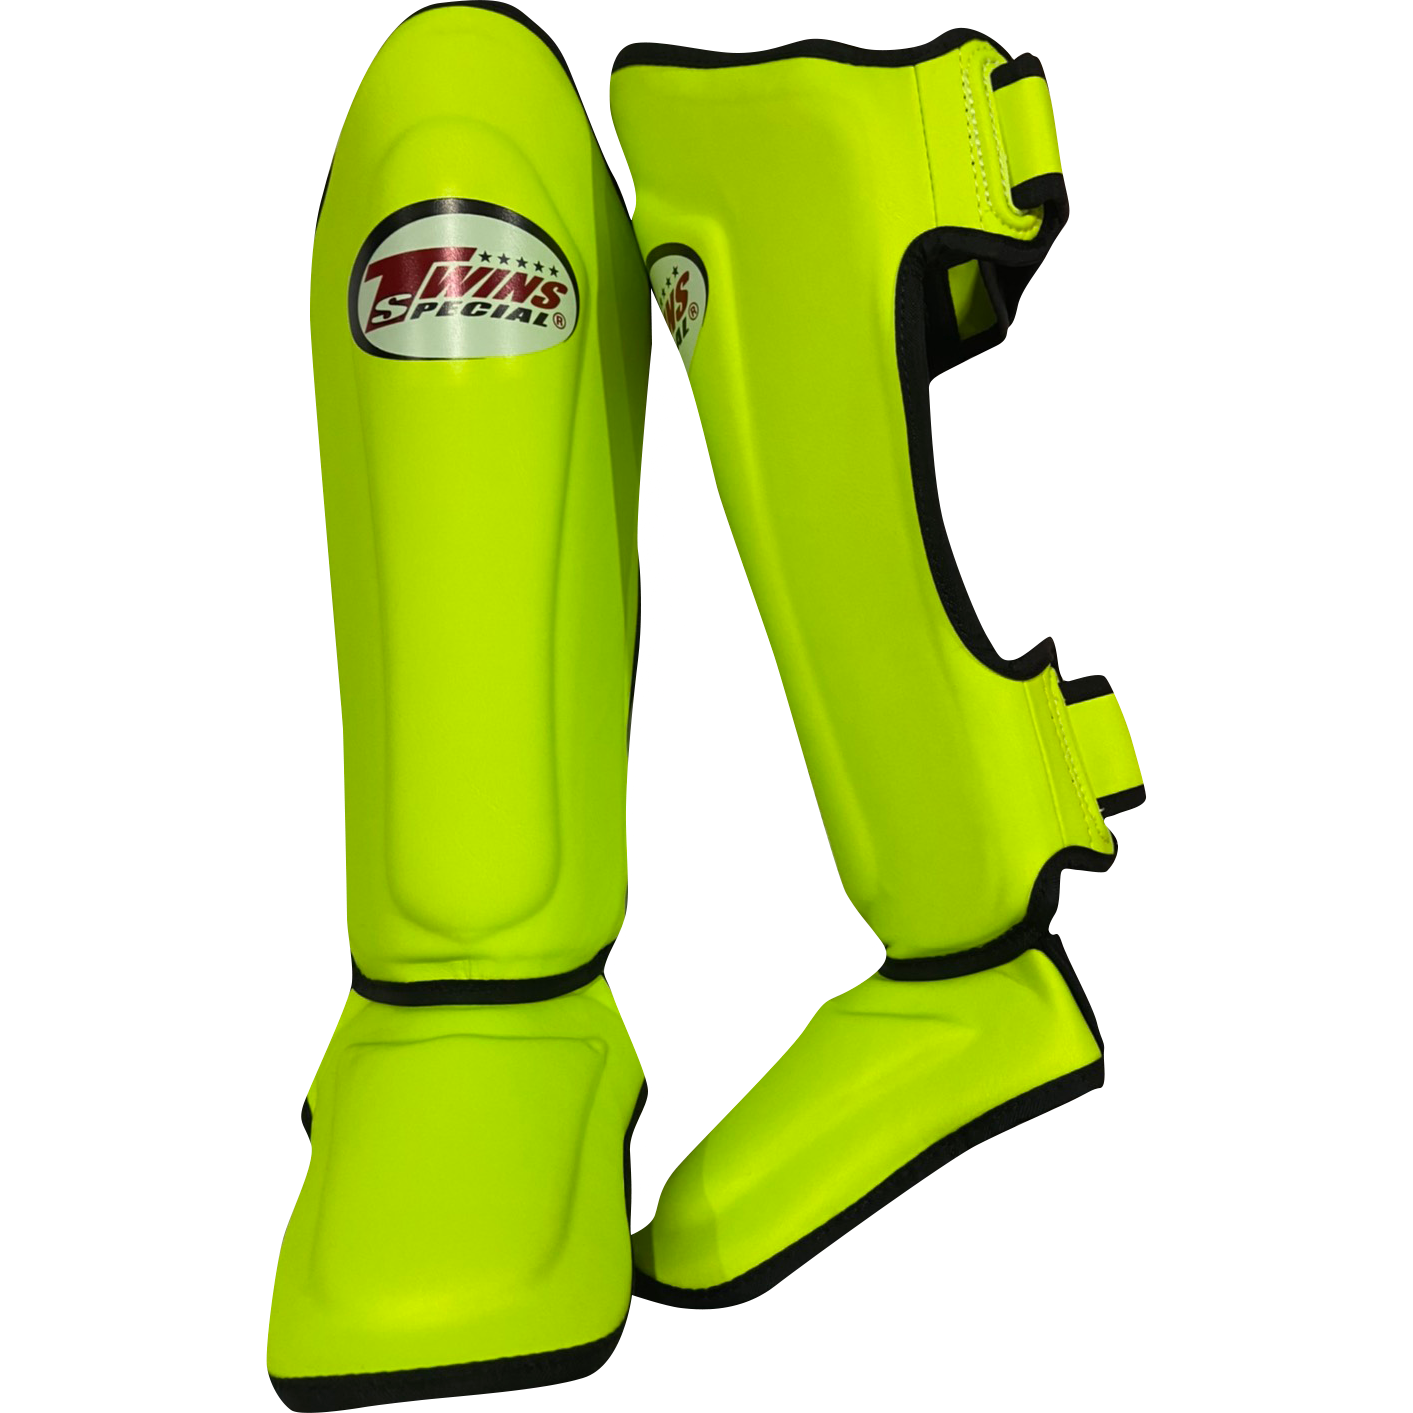 Twins Special Shin Guards SGS10 Light Green